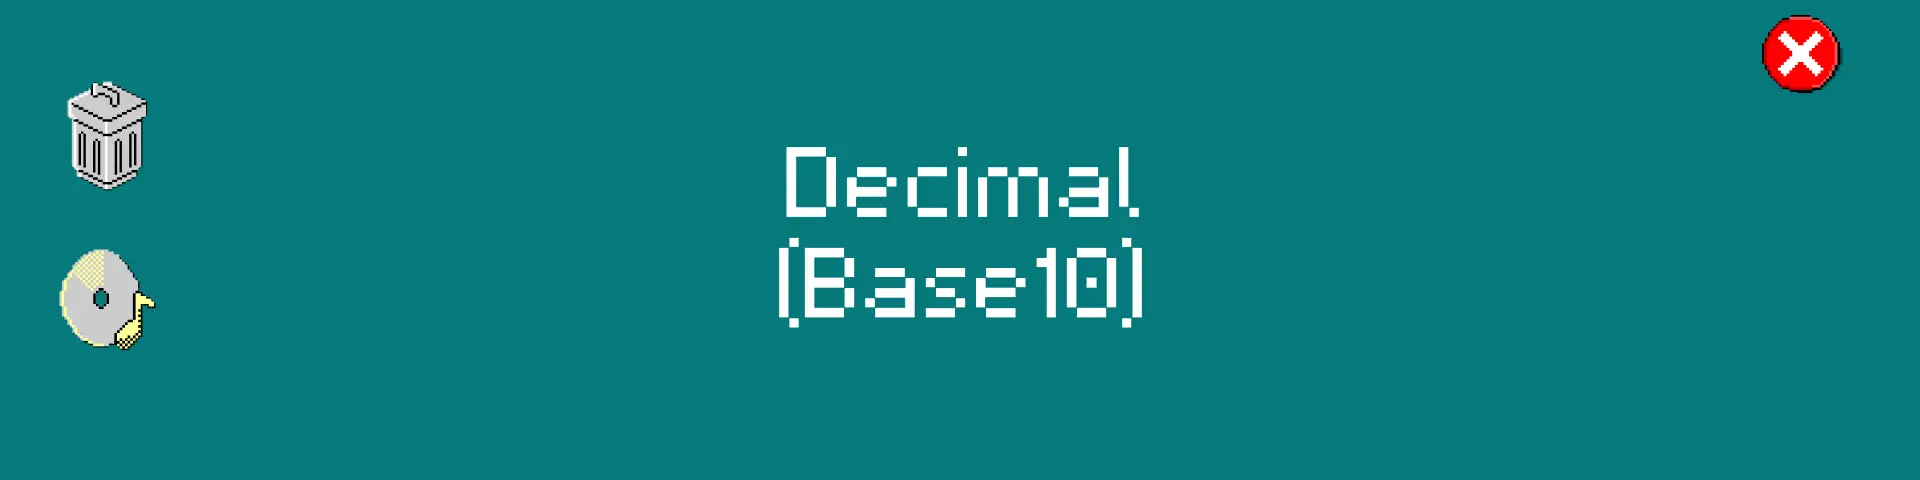 In this article we will go through the most basic topics of Decimal (aka Base10): what is decimal, how it works and how to convert text to Base10 format.